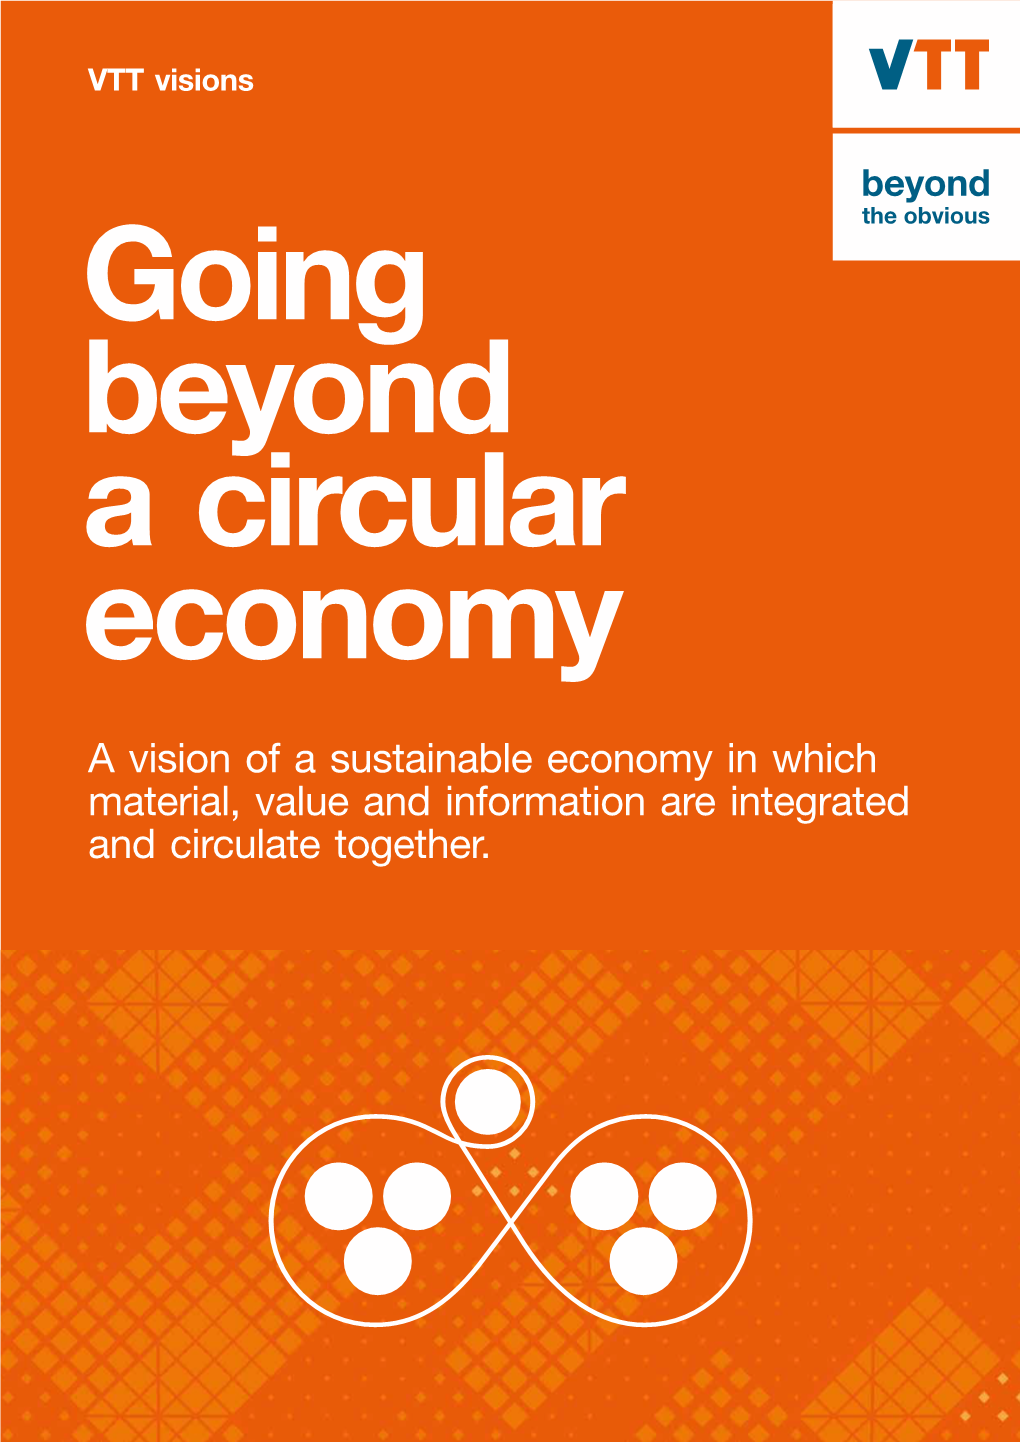 A Vision of a Sustainable Economy in Which Material, Value and Information Are Integrated and Circulate Together